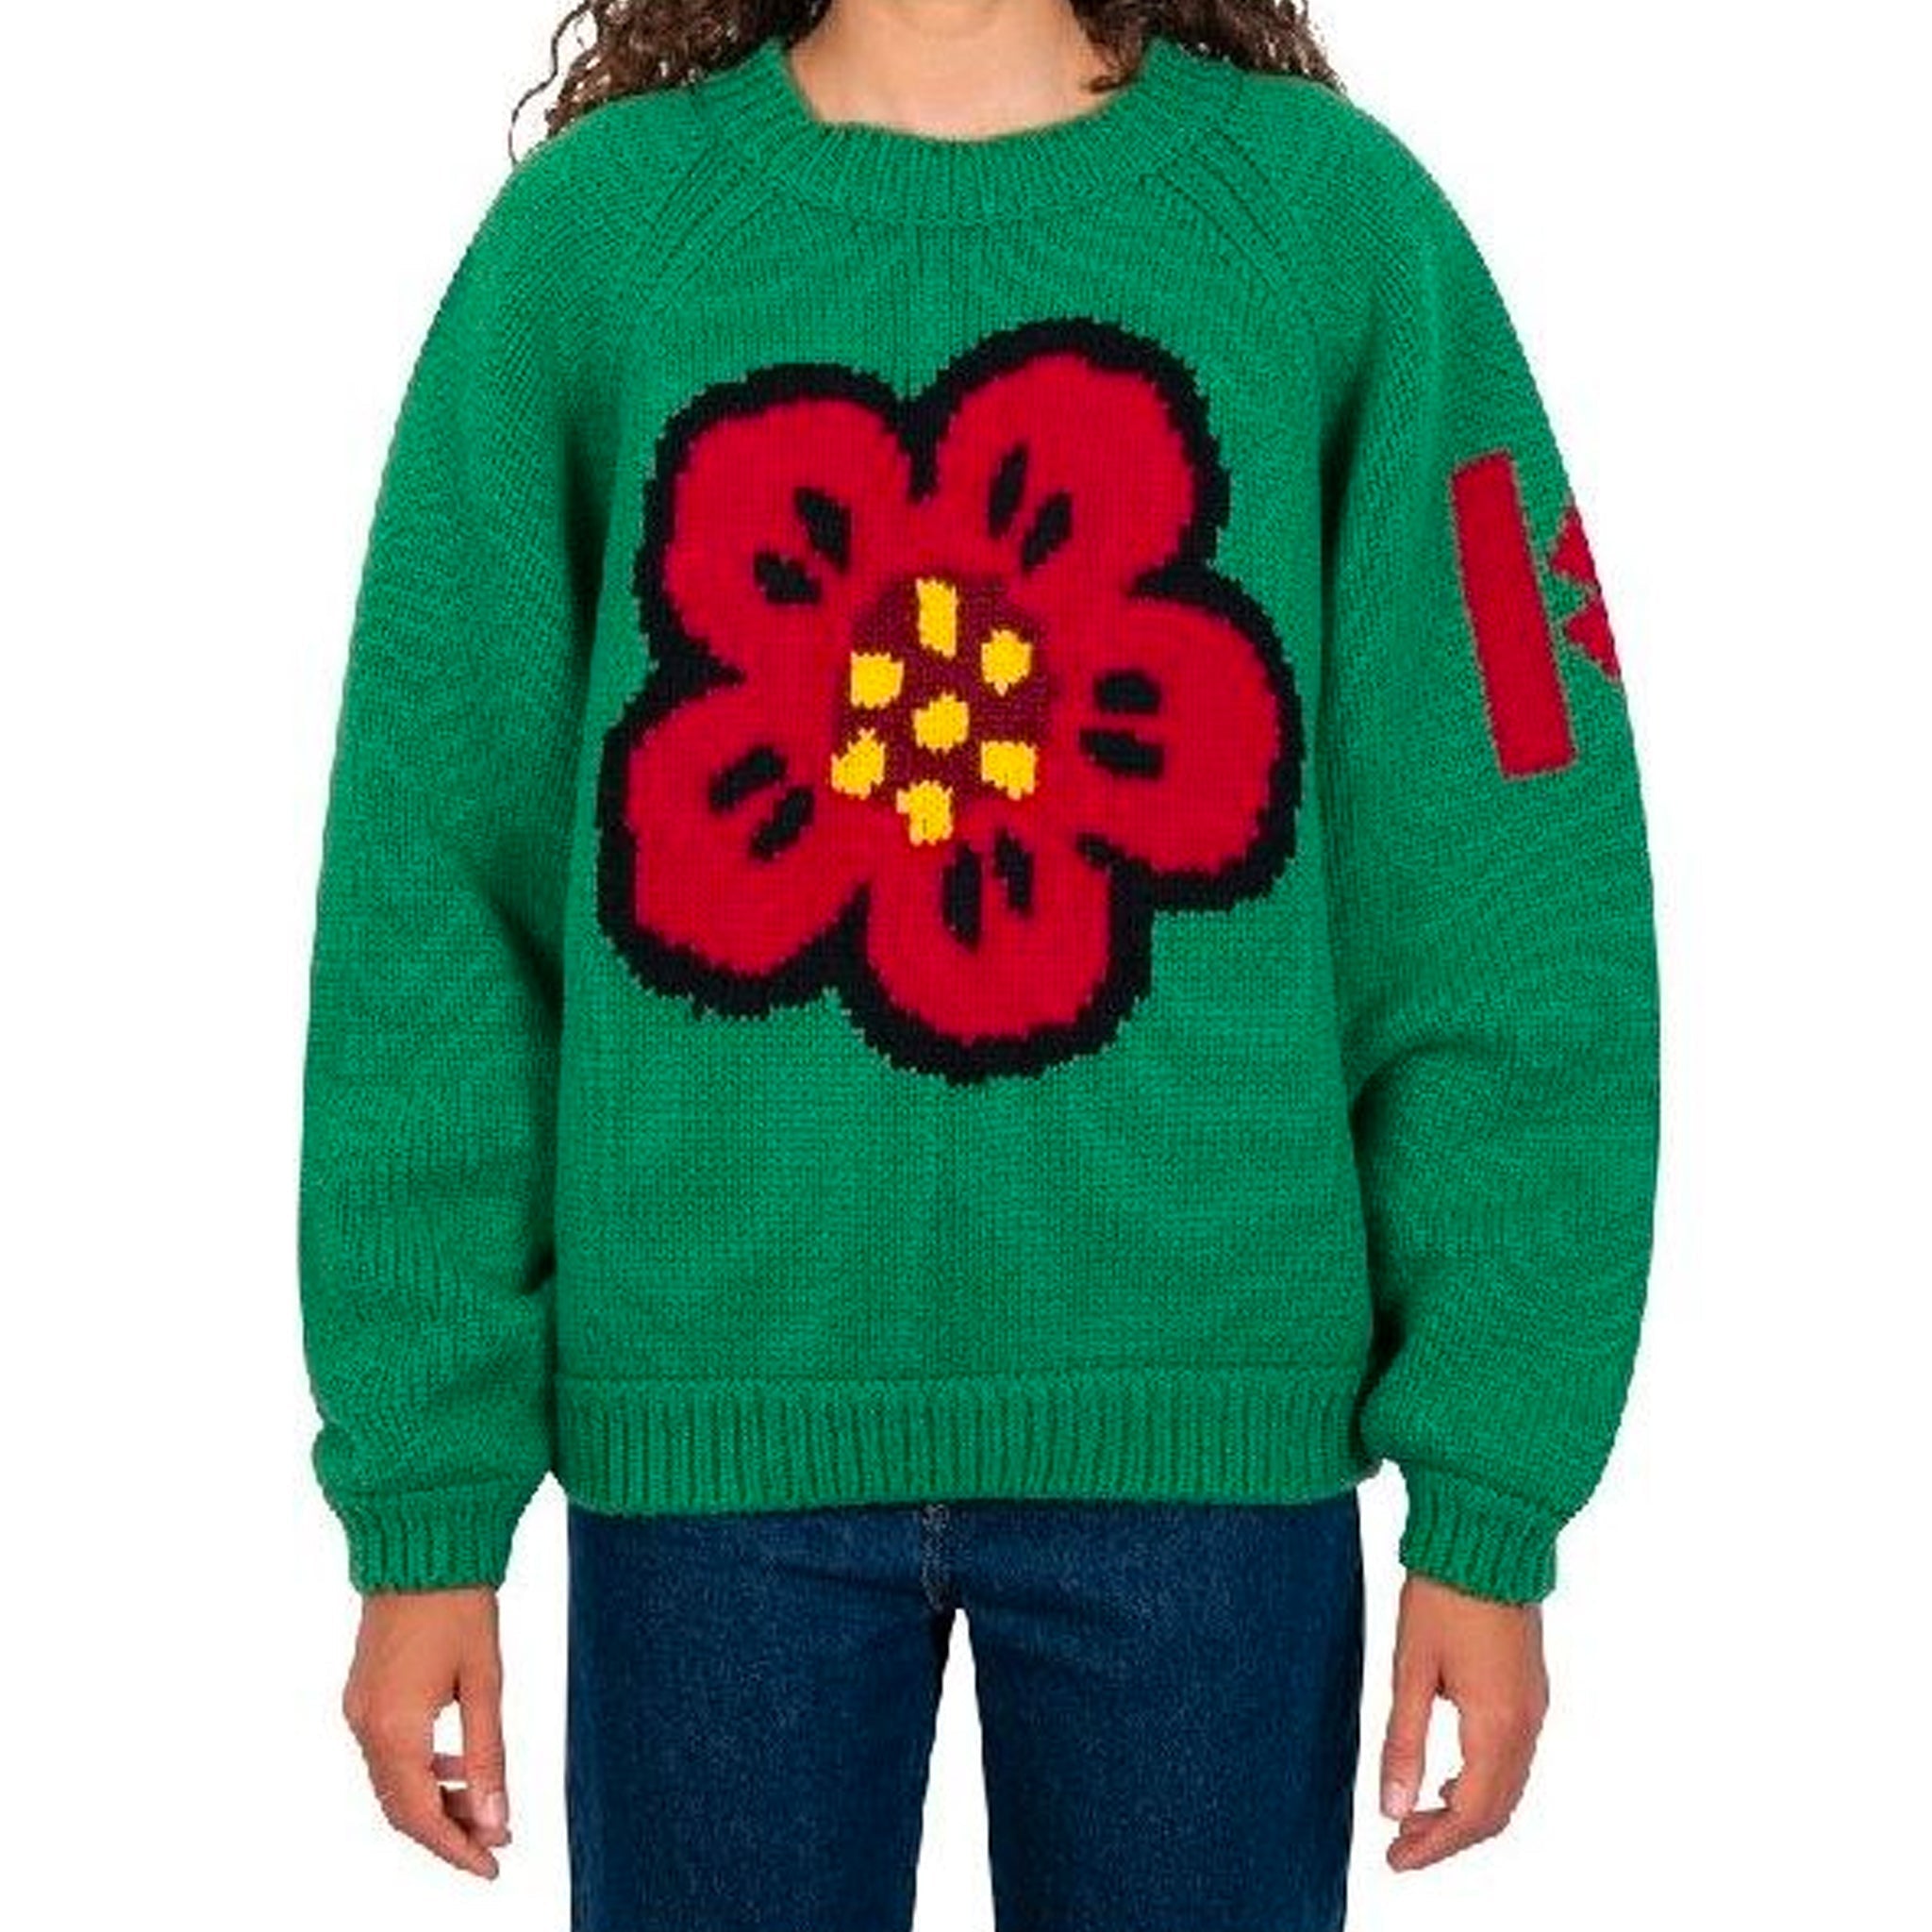 KENZO-OUTLET-SALE-Kenzo-Cotton-Sweater-Strick-GREEN-M-ARCHIVE-COLLECTION-2.jpg